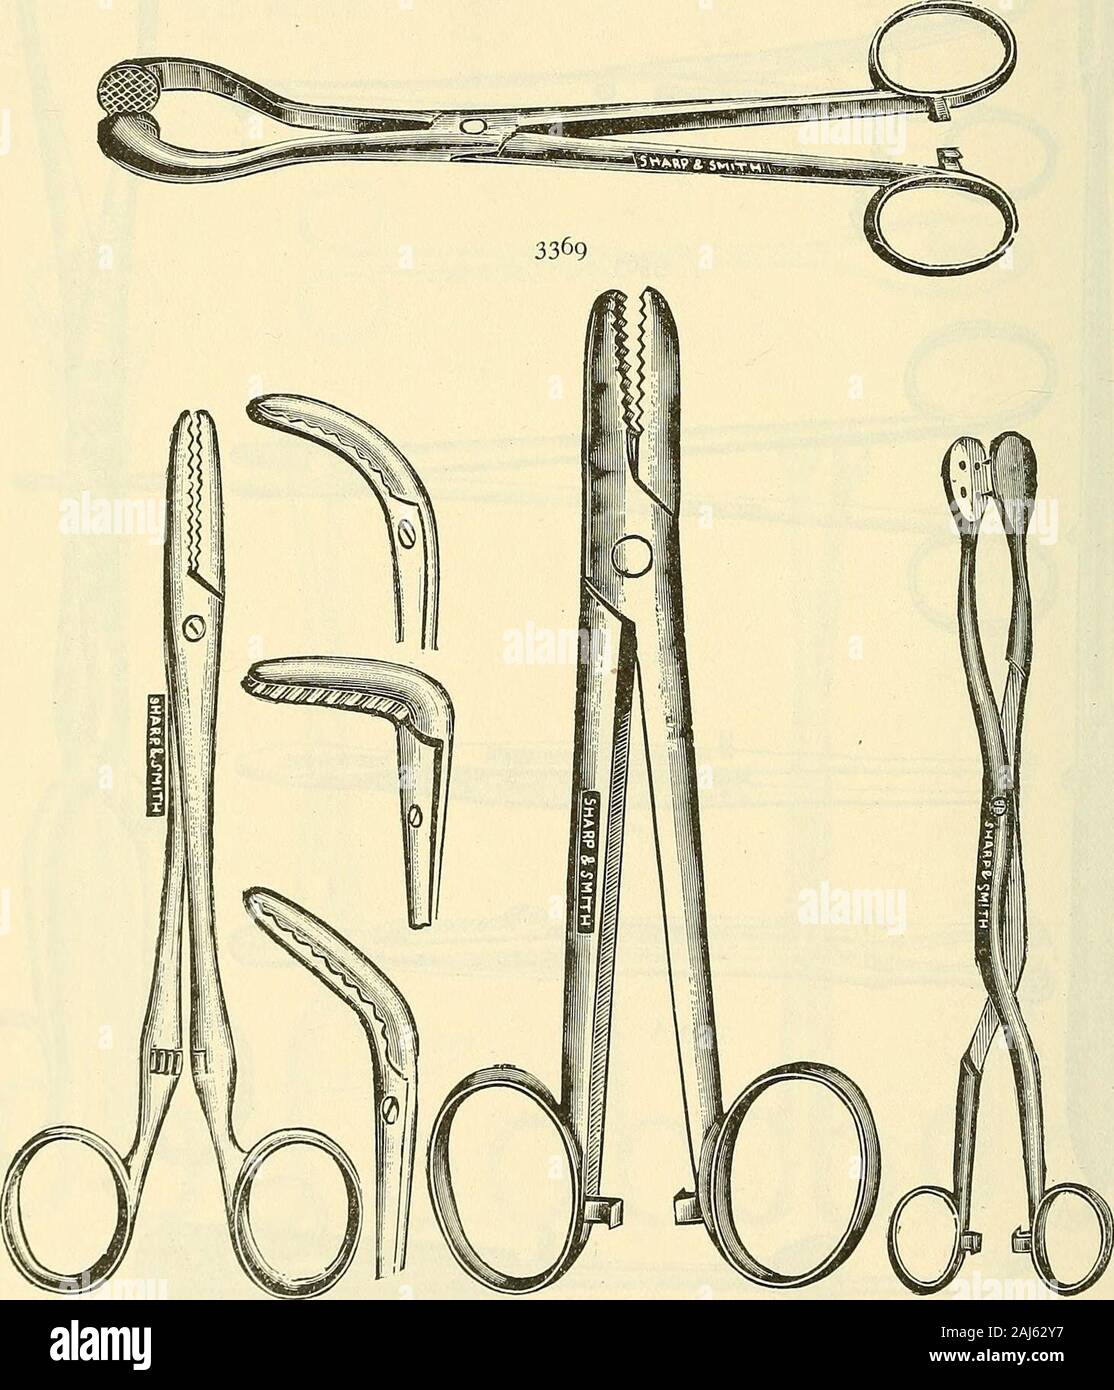 Catalogue of Sharp & Smith : importers, manufacturers, wholesale and retail dealers in surgical instruments, deformity apparatus, artificial limbs, artificial eyes, elastic stockings, trusses, crutches, supporters, galvanic and faradic batteries, etc., surgeons' appliances of every description . 3364 586 SHARP & SMITH, CHICAGO. OVARIOTOMY INSTRUMENTS. Nelatons Pedicle Forceps $ 2 85 Spencer Wells Pedicle Forceps, angular 3 75 straight 3 75 half curved 3 75 full 375 Sac 3 75 Sidney F. Wilcoxs 4 25 Thomas 2 25 Thompsons Vesico Tumor Forceps 4 50 • 4 50 ••?• 450 Dr. C. M. Wilsons 450 *3367*3368 * Stock Photo